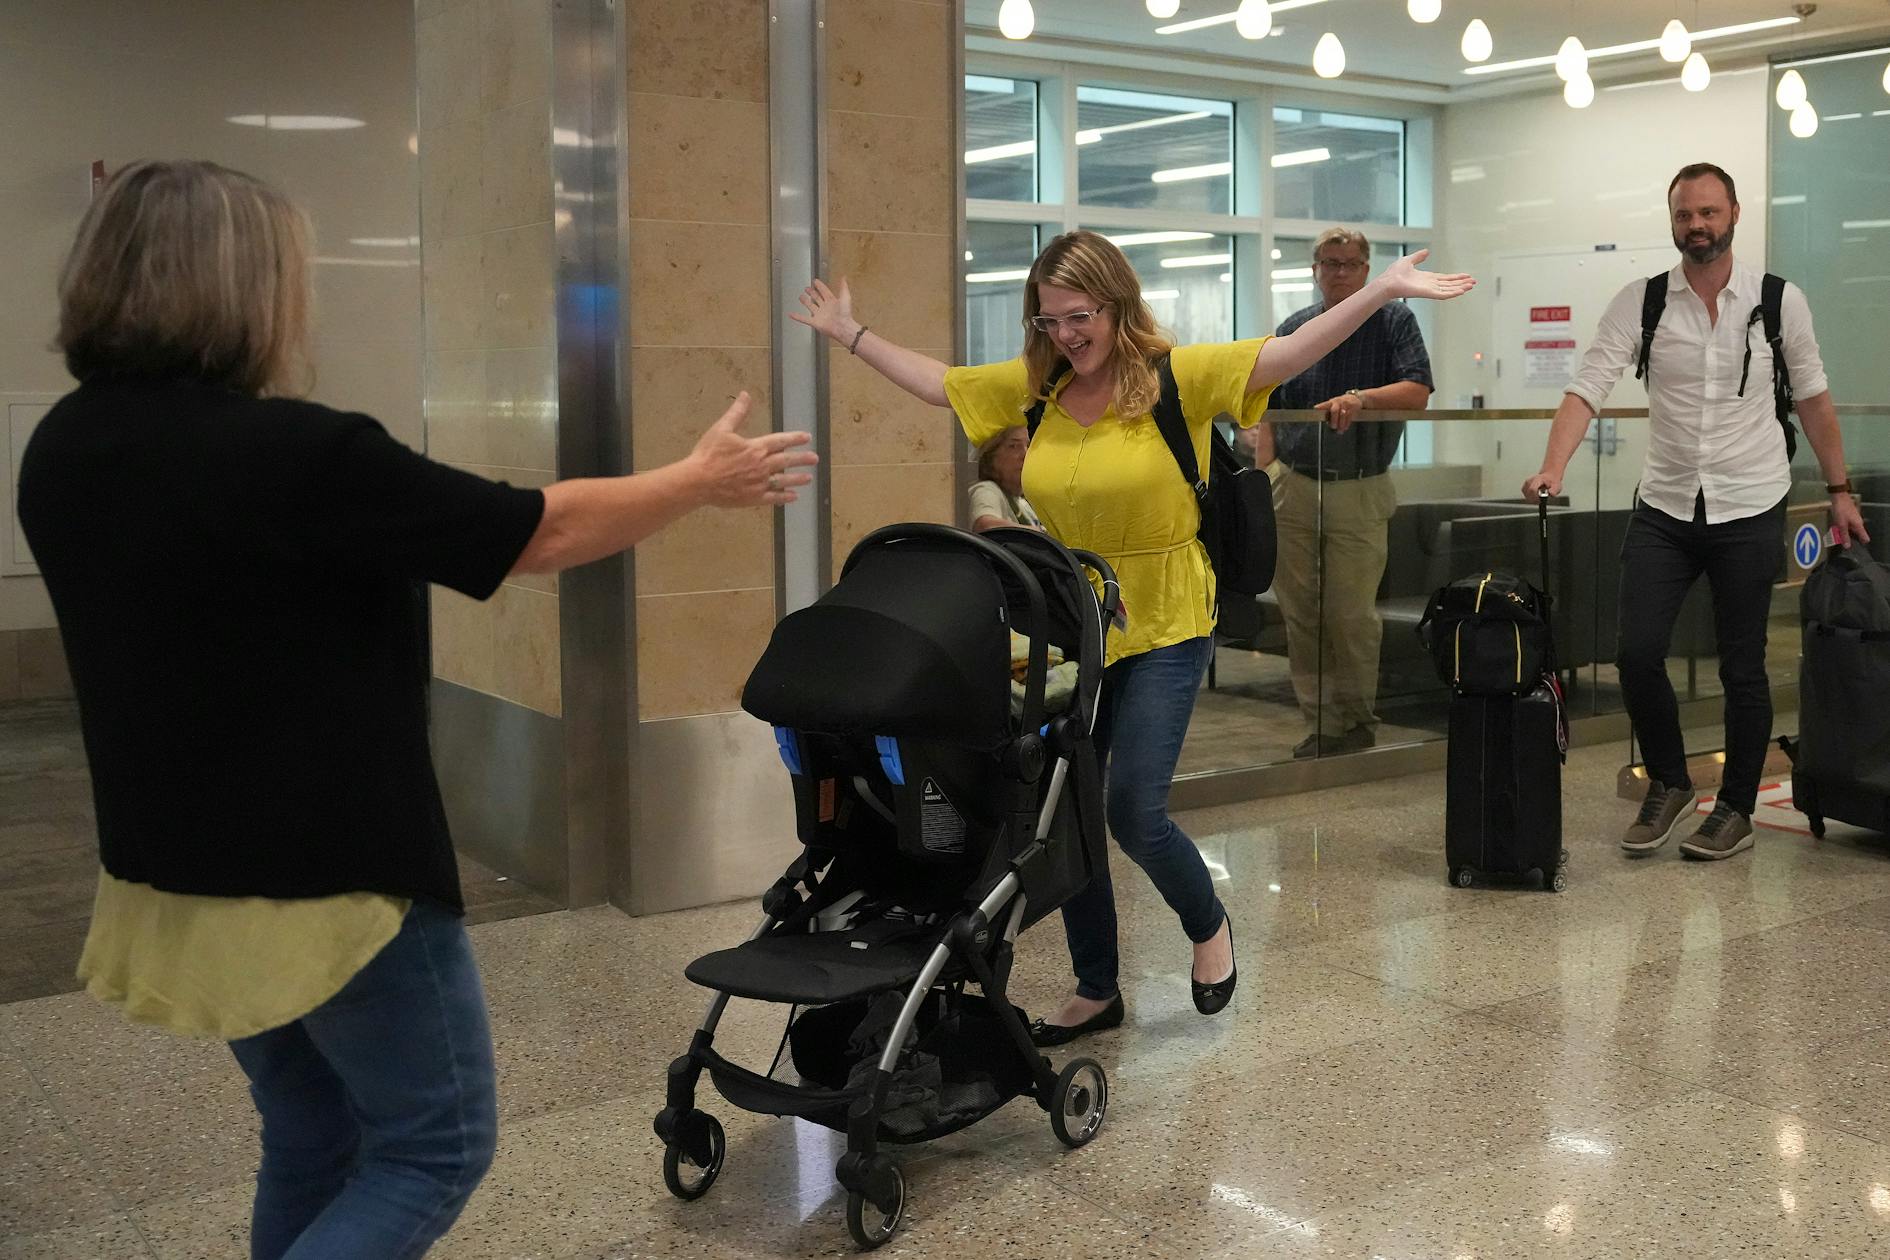 After months stuck in Brazil, Minnesota family arrives home with newborn